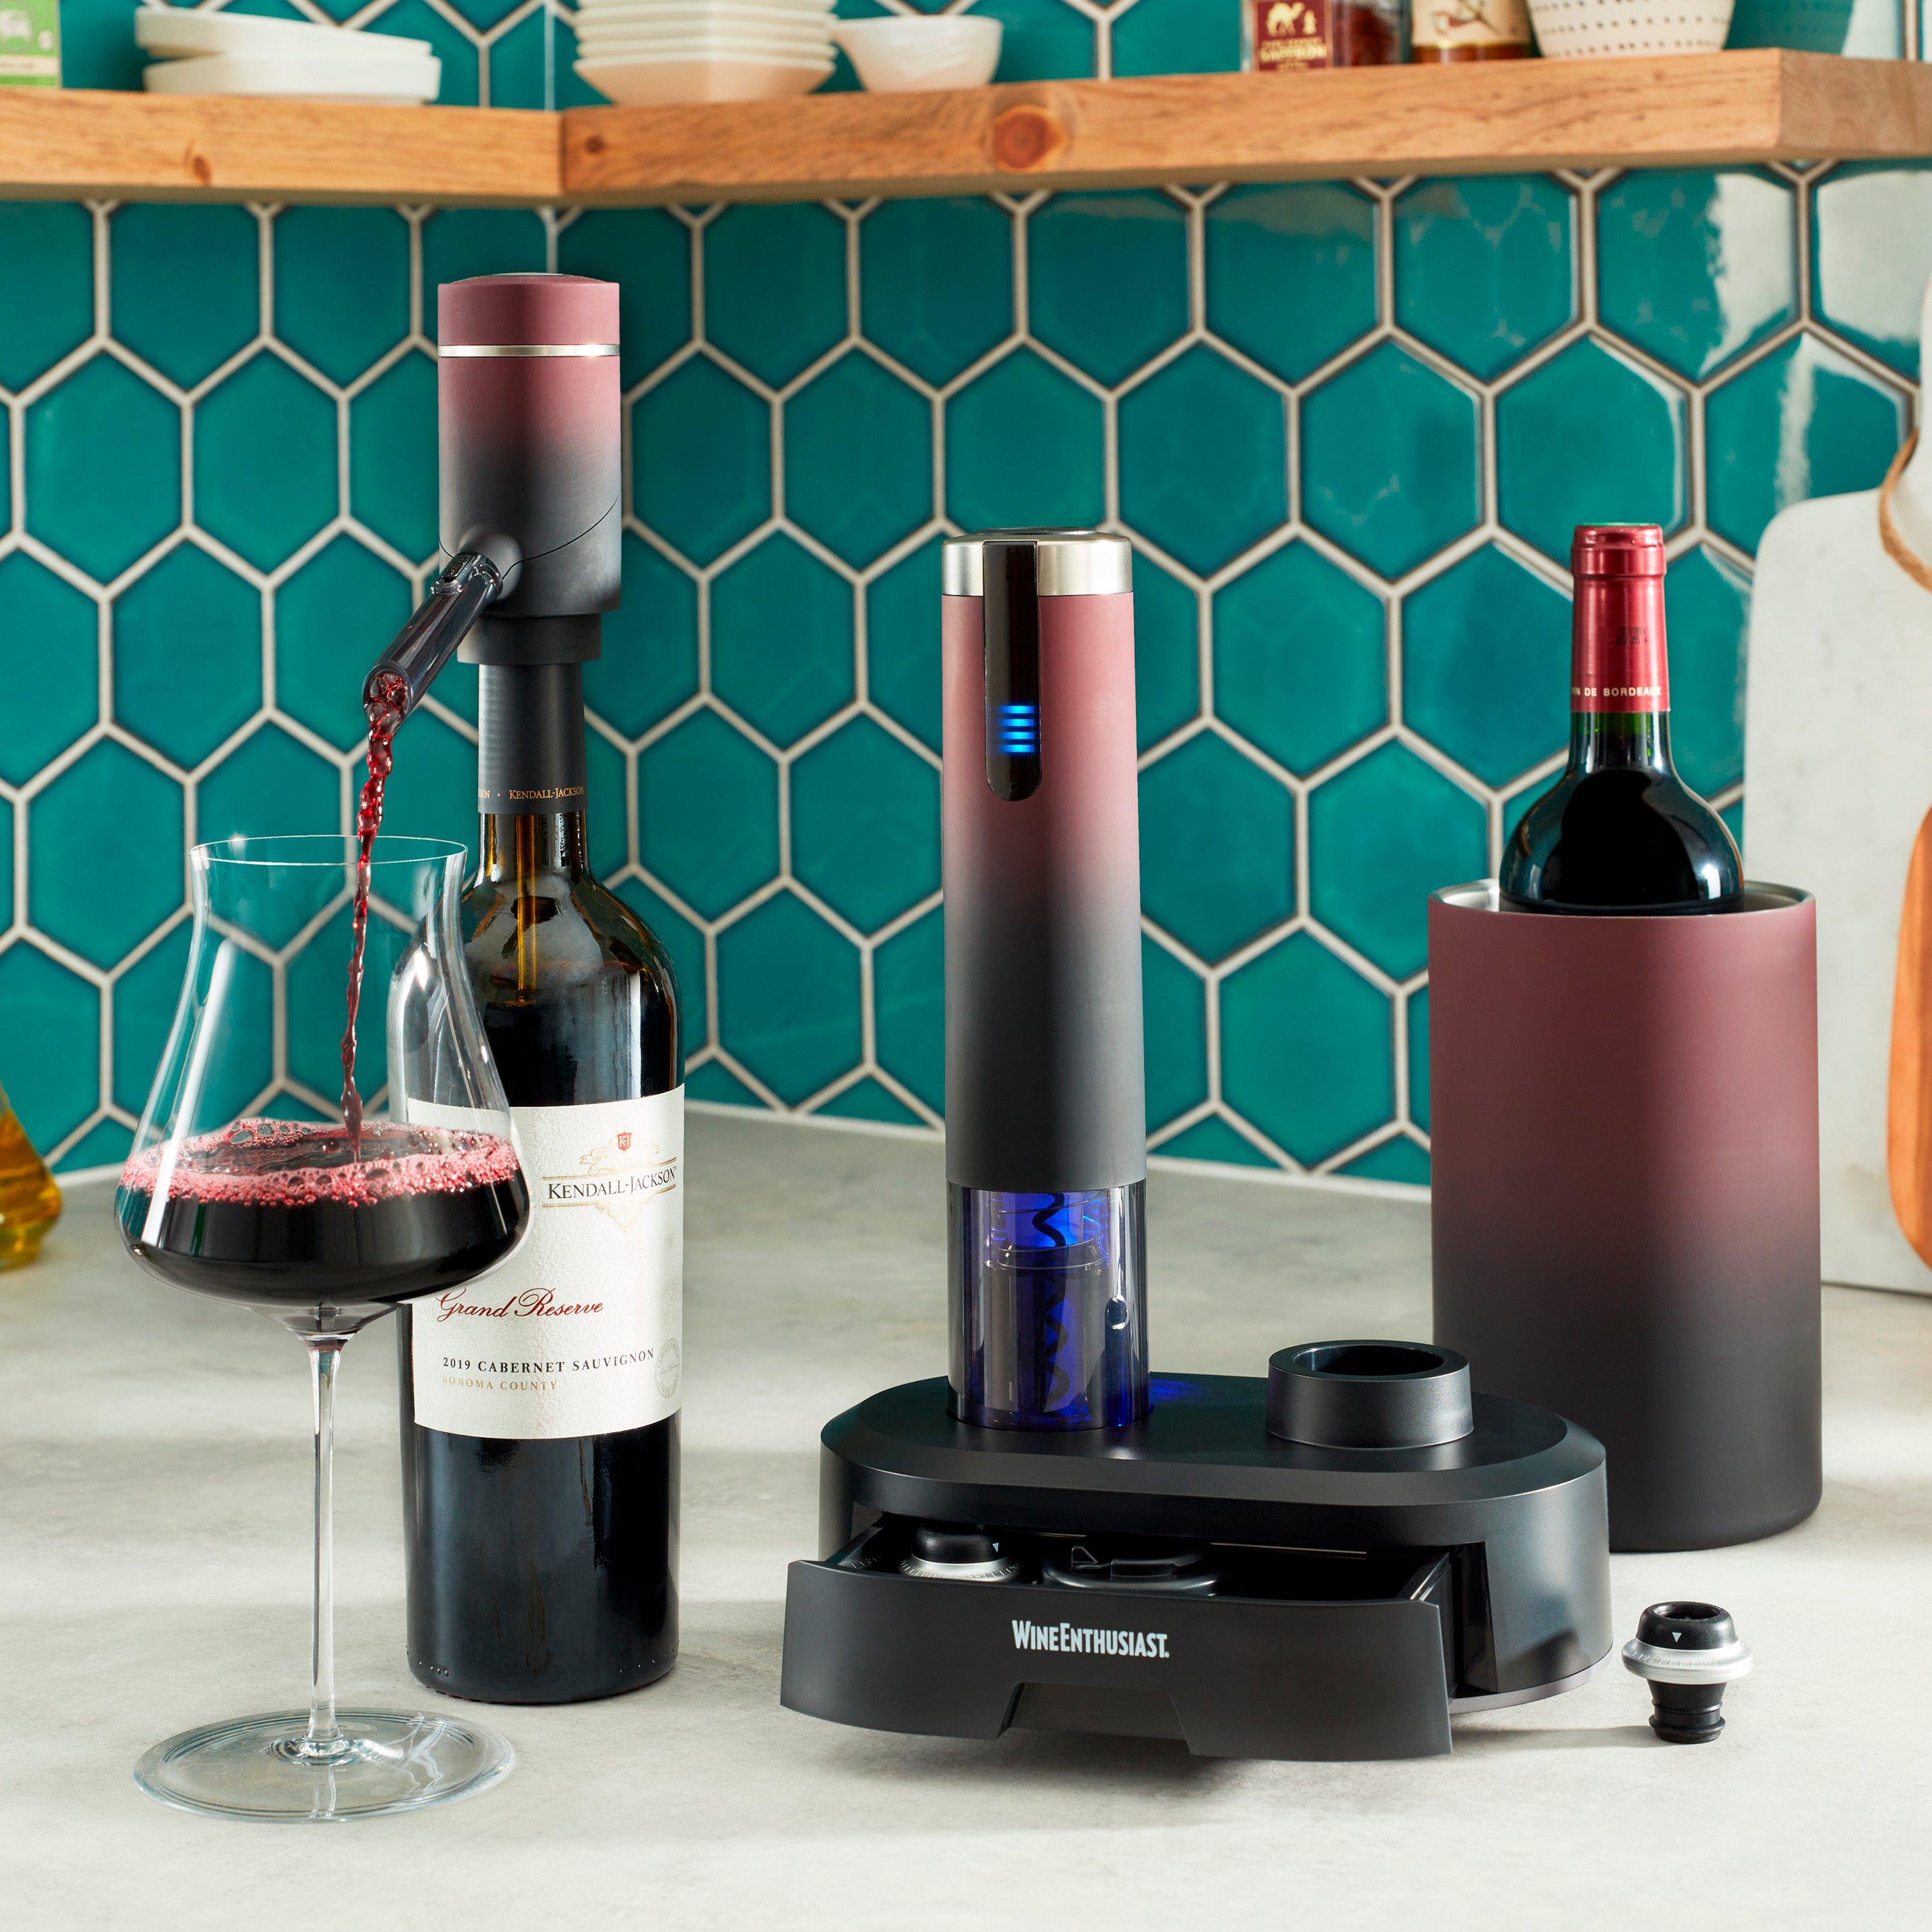 Wine Accessories & Gifts - Warehouse Sale